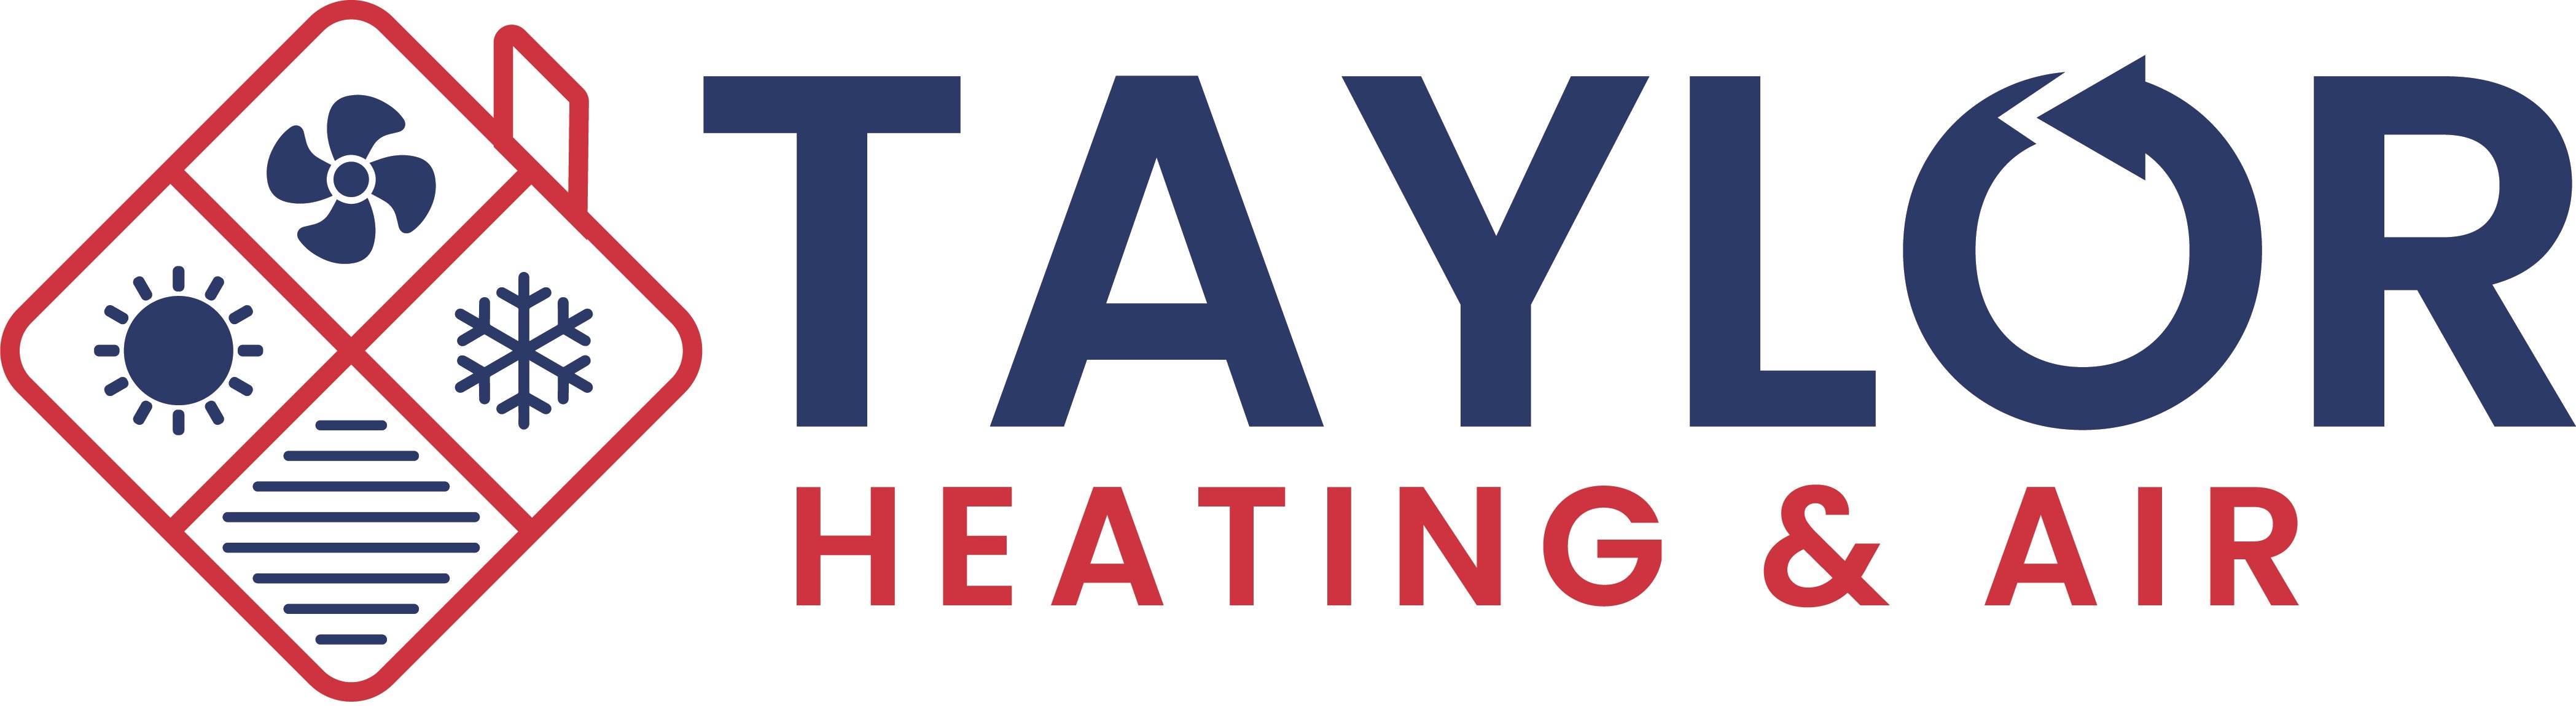 Taylor Construction Services Heating & Air Conditioning, Inc. Logo